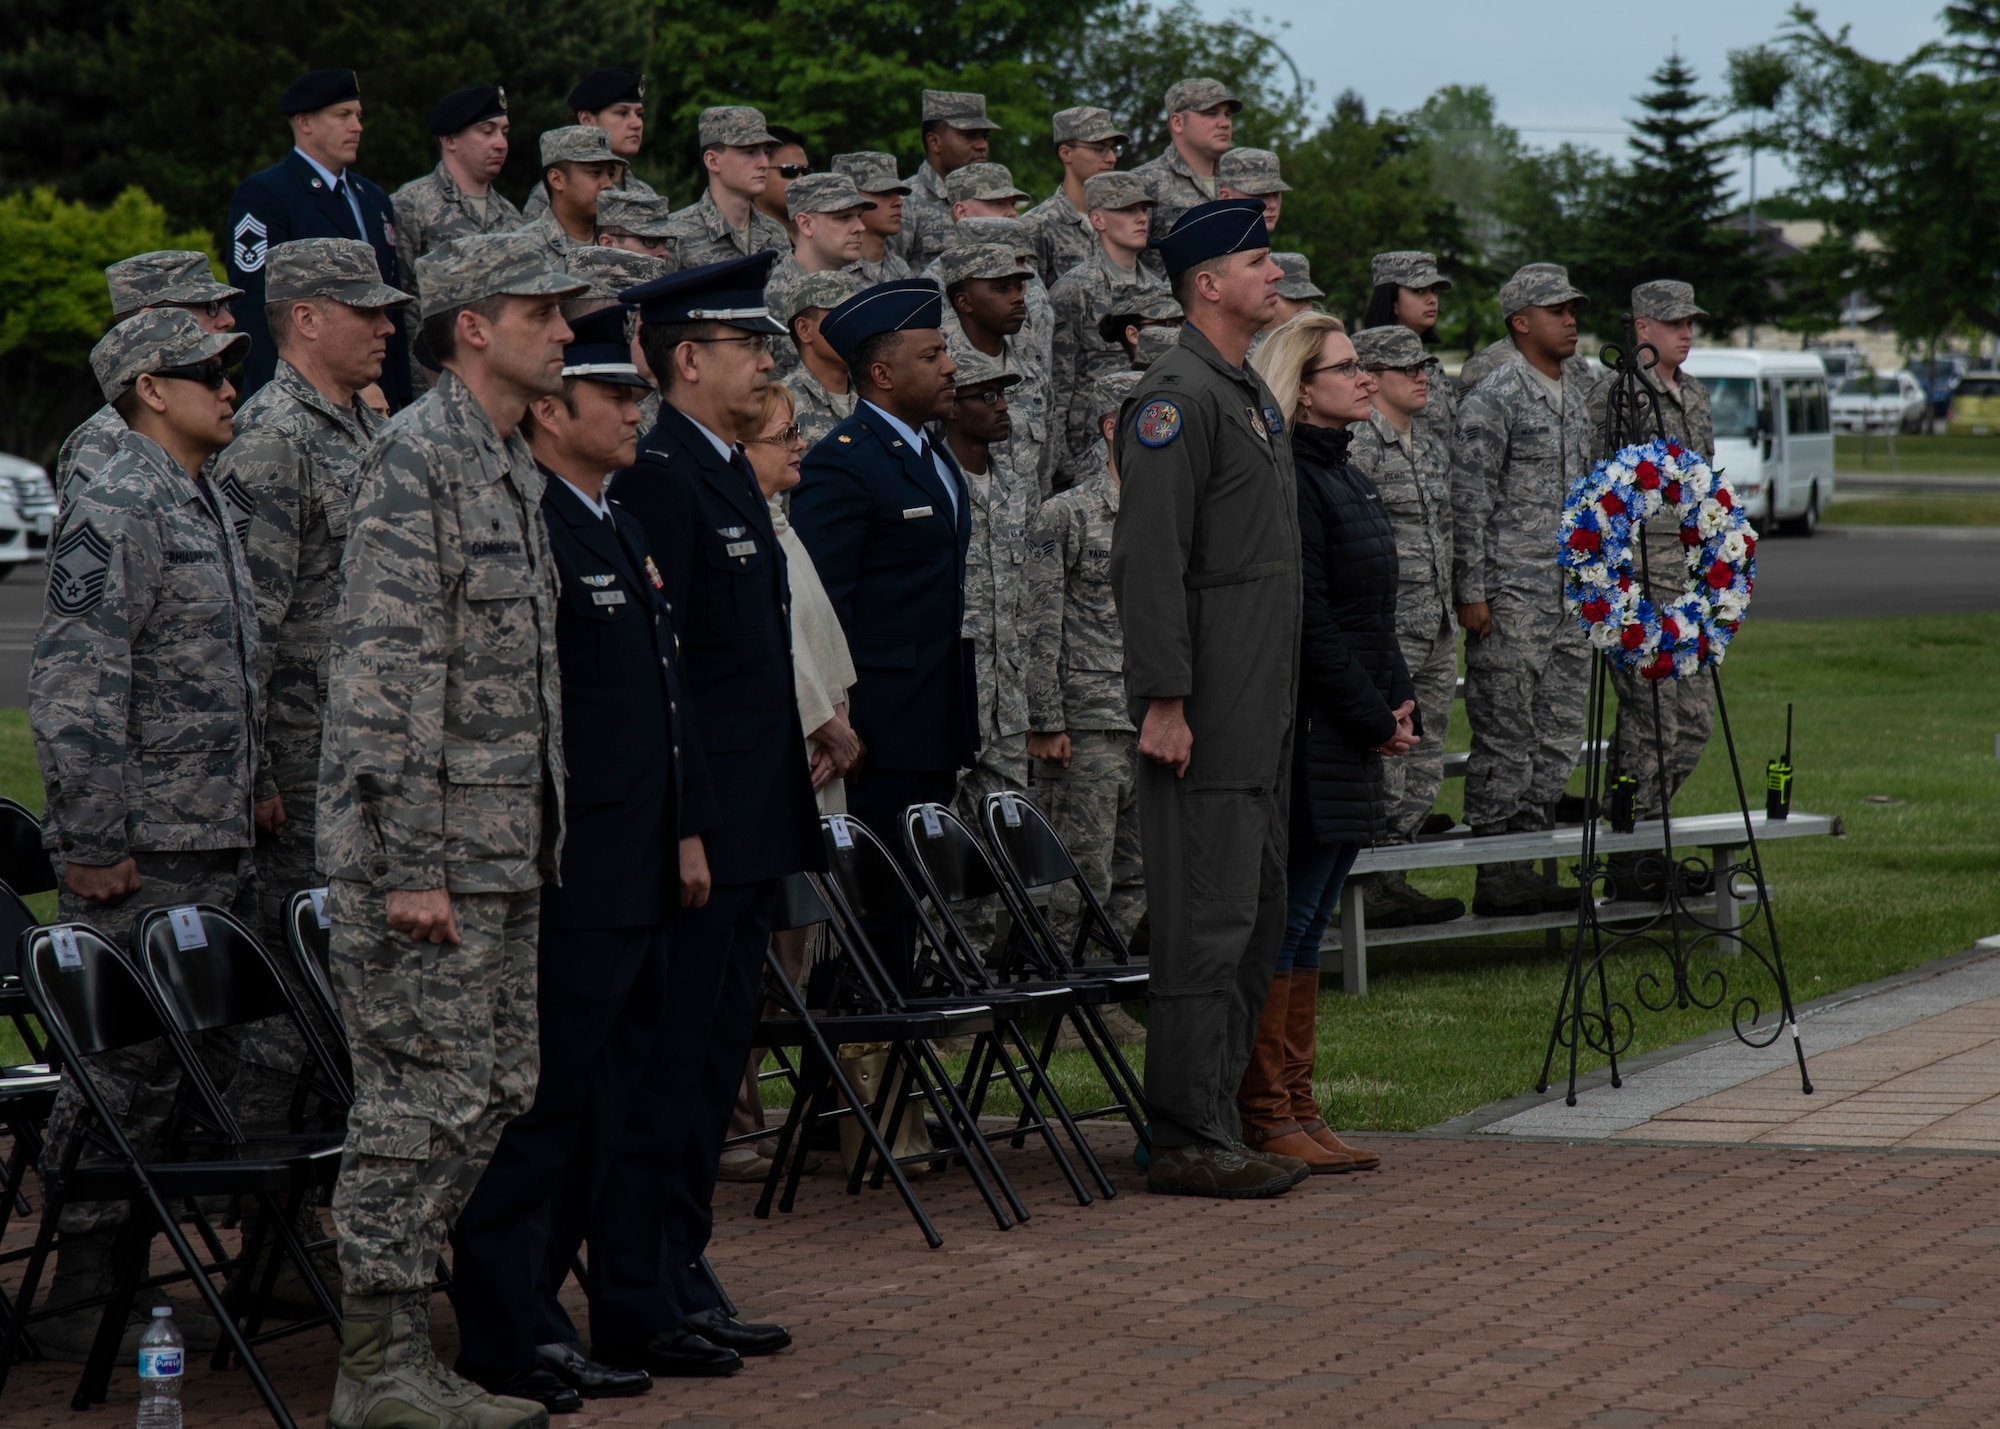 Team Misawa members stand at attention during a Memorial Day ceremony held at Misawa Air Base, Japan, May 25, 2018. Memorial Day is an American holiday, observed on the last Monday of May, honoring the men and women who died while serving in the U.S. military. (U.S. Air Force photo by Airman 1st Class Collette Brooks)